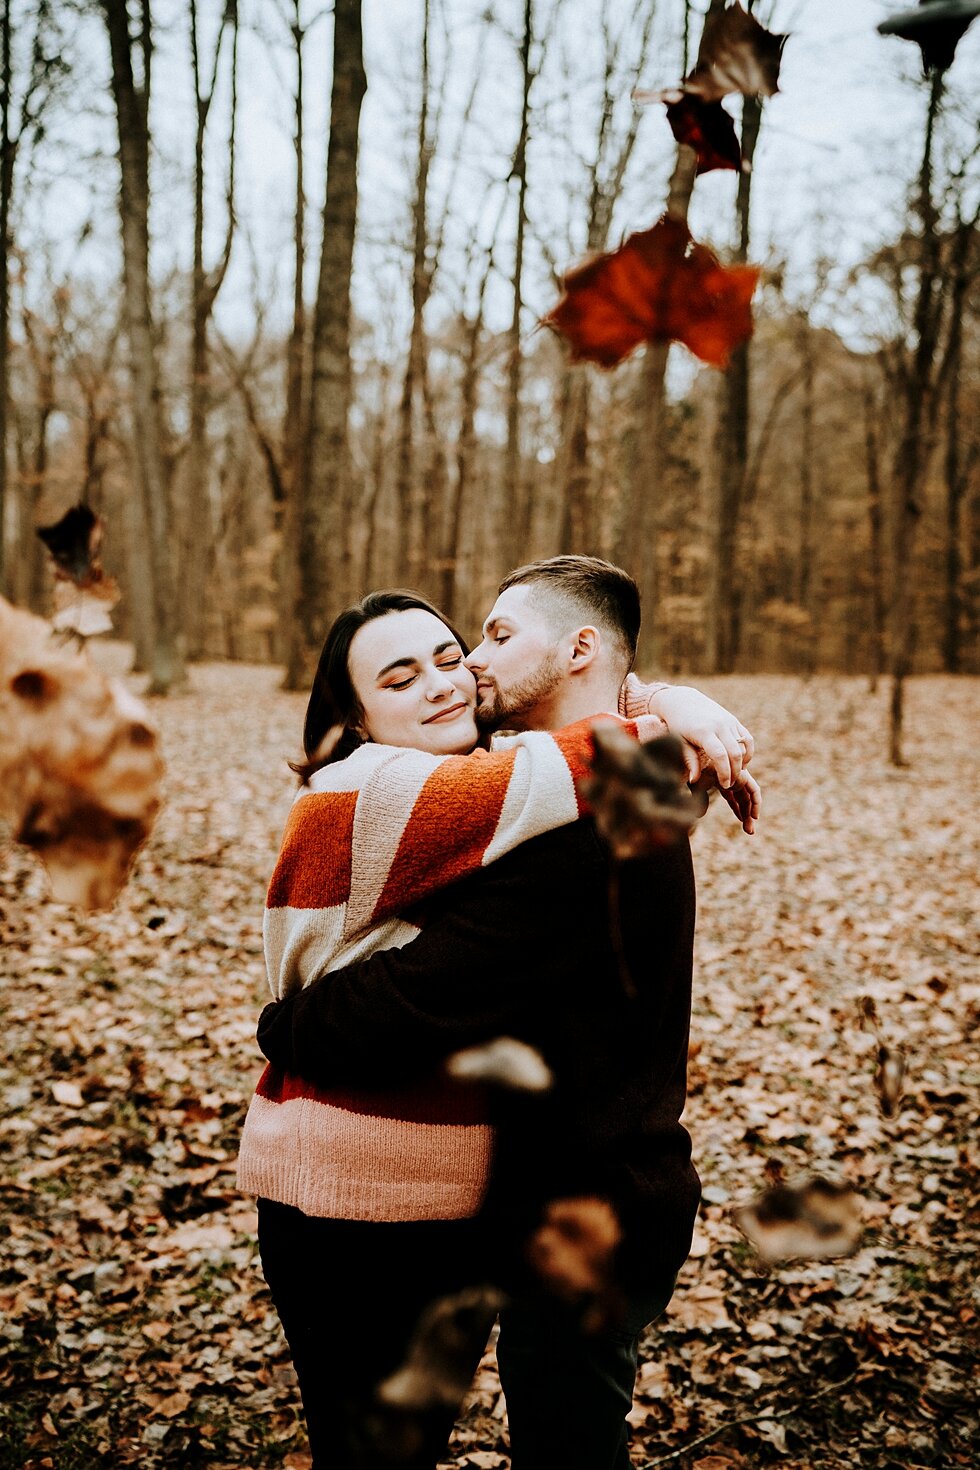  Sweet kisses on the cheek as this couple dances in the fall leaves. #engagementgoals #engagementphotographer #engaged #outdoorengagement #kentuckyphotographer #indianaphotographer #louisvillephotographer #engagementphotos #savethedatephotos #savethe